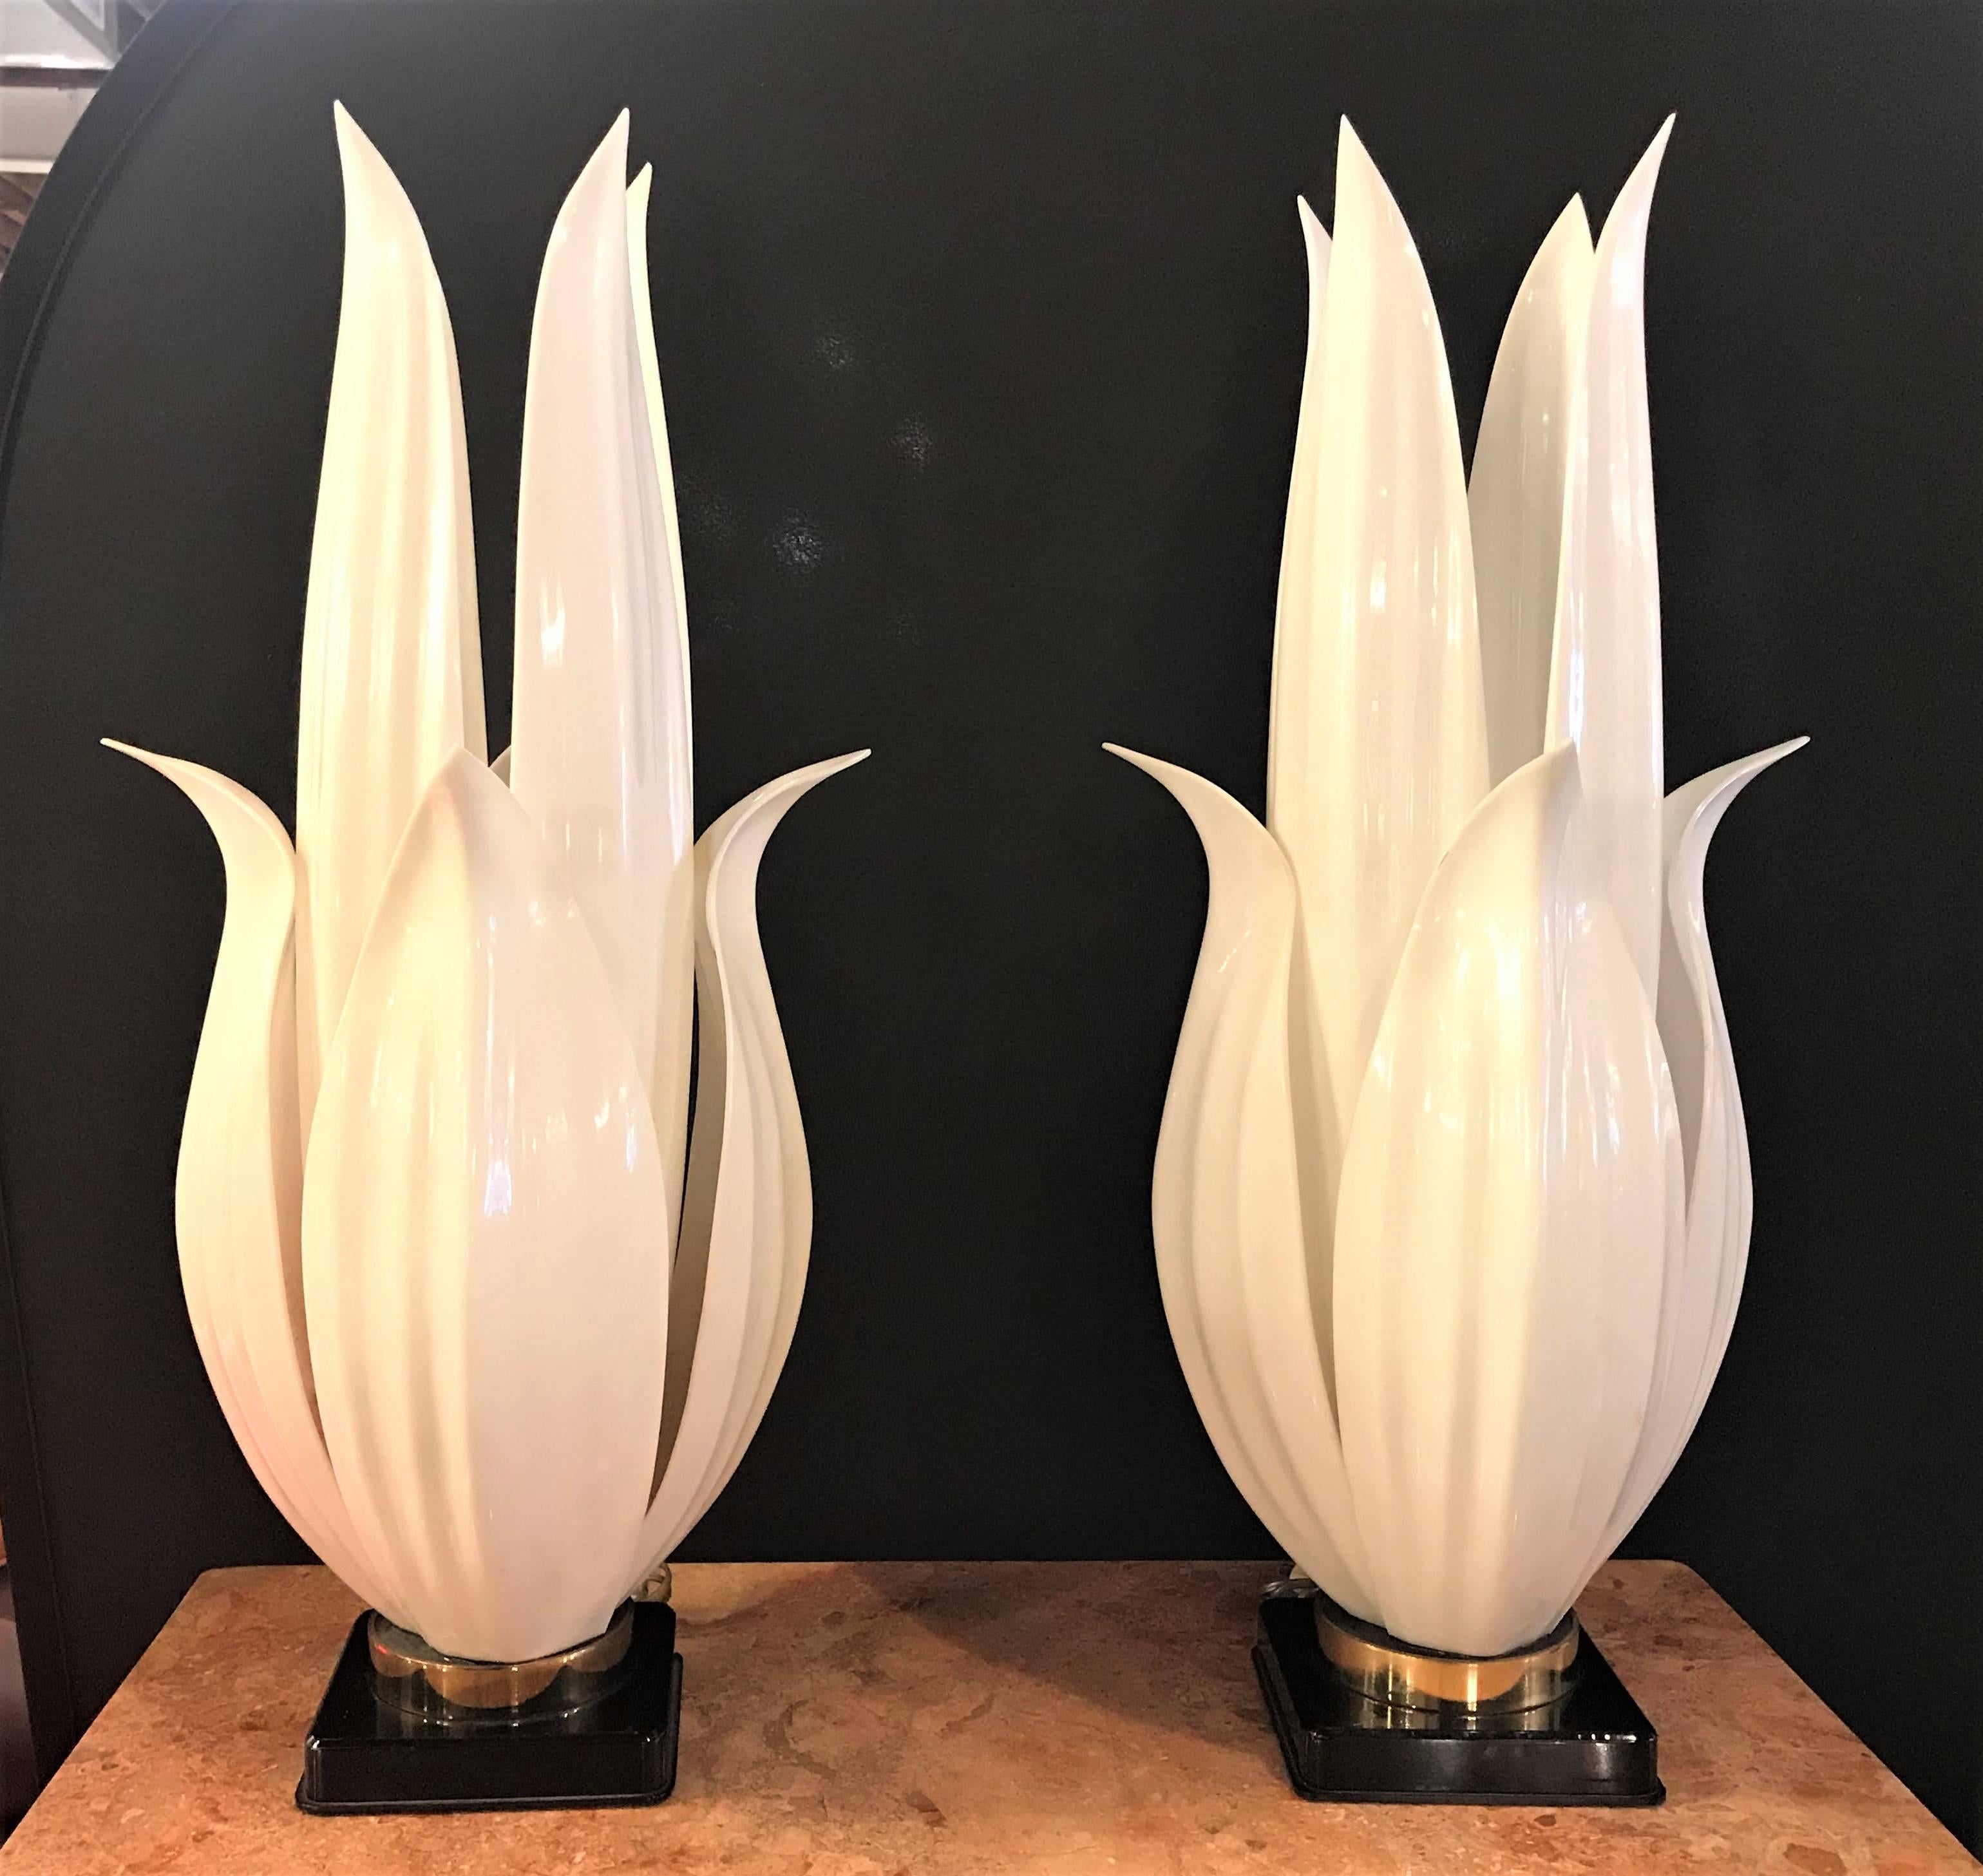 A pair of vintage Mid-Century Modern Rougier labelled table lamps crafted of white Lucite with brass hardware and black lacquer bases, circa 1970. Each bearing the tag Rougier.